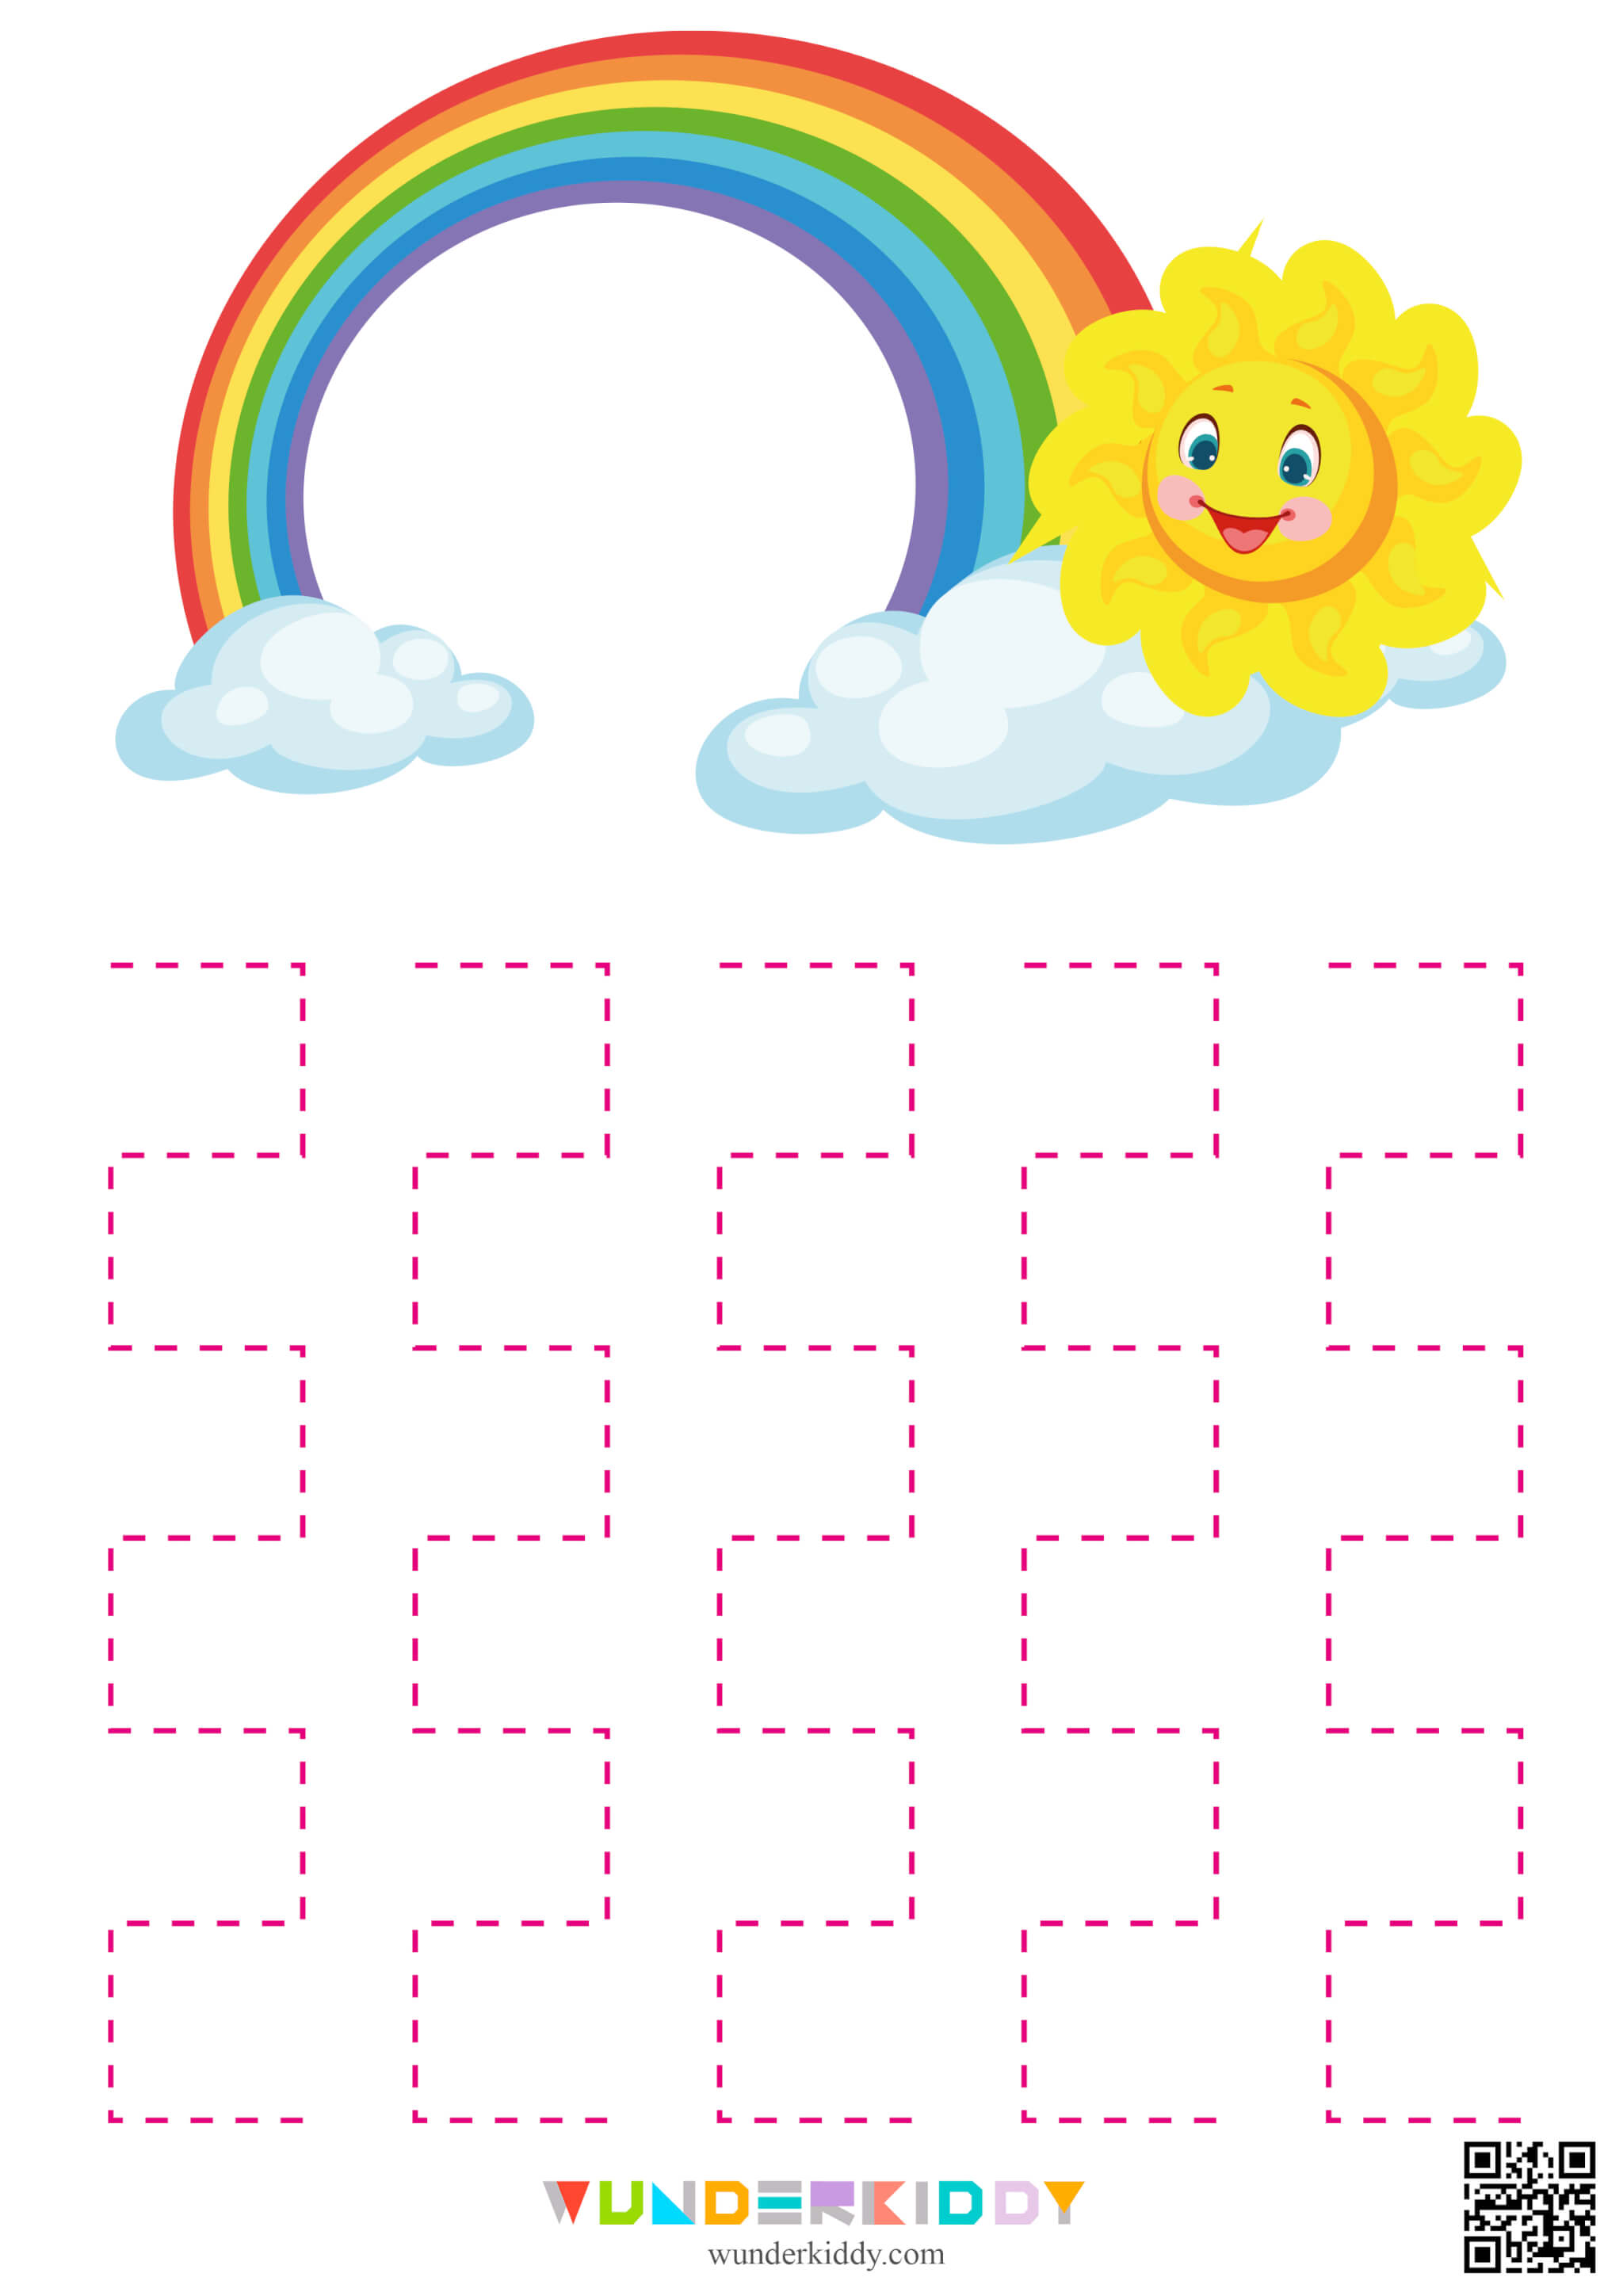 Worksheets «Sun and rainbow» - Image 7